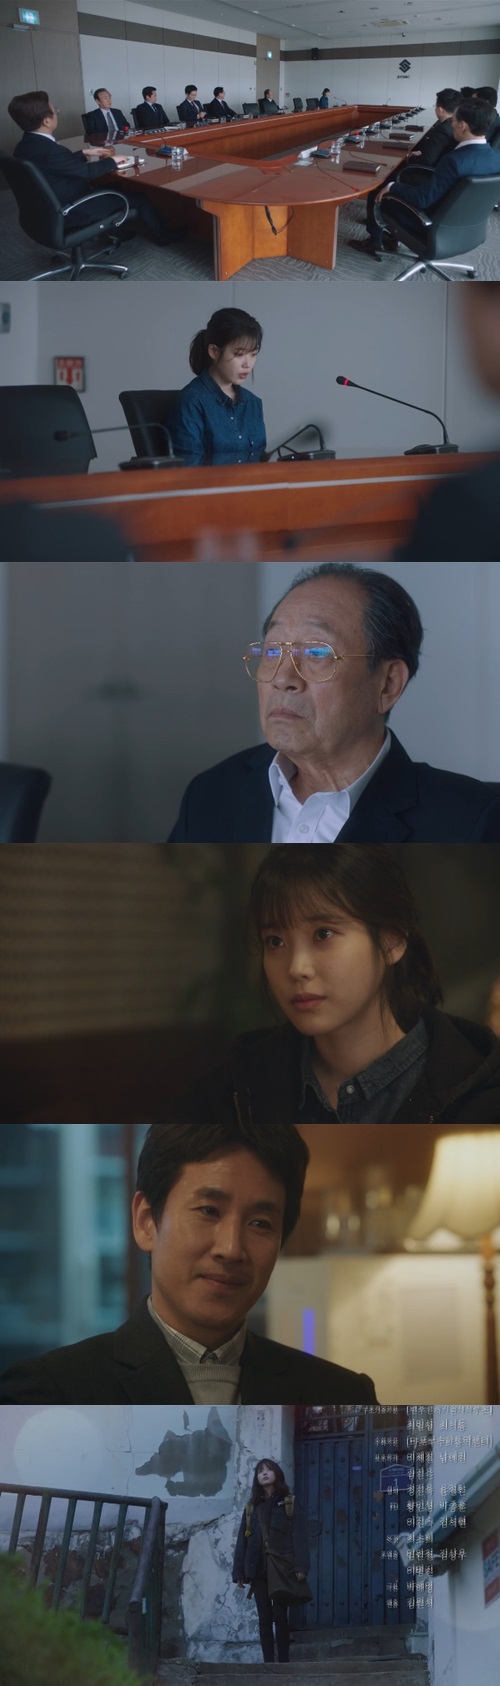 Lee Ji-an (IU) helped Park Dong-hoon (Lee Sun Gyun) in both sides of the water in the 12th episode of TVNs tree drama My Uncle (playplayplayed by Park Hae-young/directed by Kim Won-seok), which was broadcast on April 26.Park Dong-hoon was angry at his wife Kang Yoon-hee (Ijia Boone)s confession of affair, and Ijian beamed as he tapped the conversation.Lee Ji-an then started to help Park Dong-hoon harder.First, Ijian worked overtime when Park Dong-hoon was busy with his business promotion Interview Moon Xero business, and he was followed in the last train of the subway.Lee Ji-an also prevented Do Joon-young (Kim Young-min) and Yoon Sang-moo (Jung Jae-sung) from being sent to the audit room by his friend Song Ki-beom (Ahn Seung-kyun) to make Park Dong-hoon and Lee Ji-ans Scandal.Song hacked the mail from the audit room and deleted it all before someone read it, preventing the spread of Scandal.Lee also called Kang Yoon-hee first and informed Park Dong-hoon that he was in a dangerous position because of Do Jun-young.Kang Yoon-hee told Do Jun-young, If it was done to divorce me, why do you keep bothering Dong-hoon after me?If you keep doing this, I will burst into everything you cheated on, manipulated Scandal using Ijian, and cut off Park Sang-moo (Jung Hae-gyun).Do Joon-young inevitably gave up Park Dong-hoon Ijians Scandal and informed Kang Yoon-hee that Why are all the women around Park Dong-hoon like this?Kang Yoon-hee was embarrassed, but told Ijian, Thank you for calling first, and shed tears alone when Ijian admitted his feelings toward Park Dong-hoon.In that situation, Yoon Sang pointed to Lee Ji-an as a subordinate to talk about Park Dong-hoon.Yoon Sang intends to attack Ijian directly and break the Scandal with Park Dong-hoon.But Ijian said, I first heard from Park Dong-hoon, who said that he would like to go to the party together.I didnt say that I was a dispatcher, he said, only saying good things to Park Dong-hoon.Did you like it? said Yoon Sang, who drove them between him, but I dont know if I like someone, but Ill thank Park Dong-hoon, the manager of the company, who was the first to be cut off today and made me think I might be a good person.